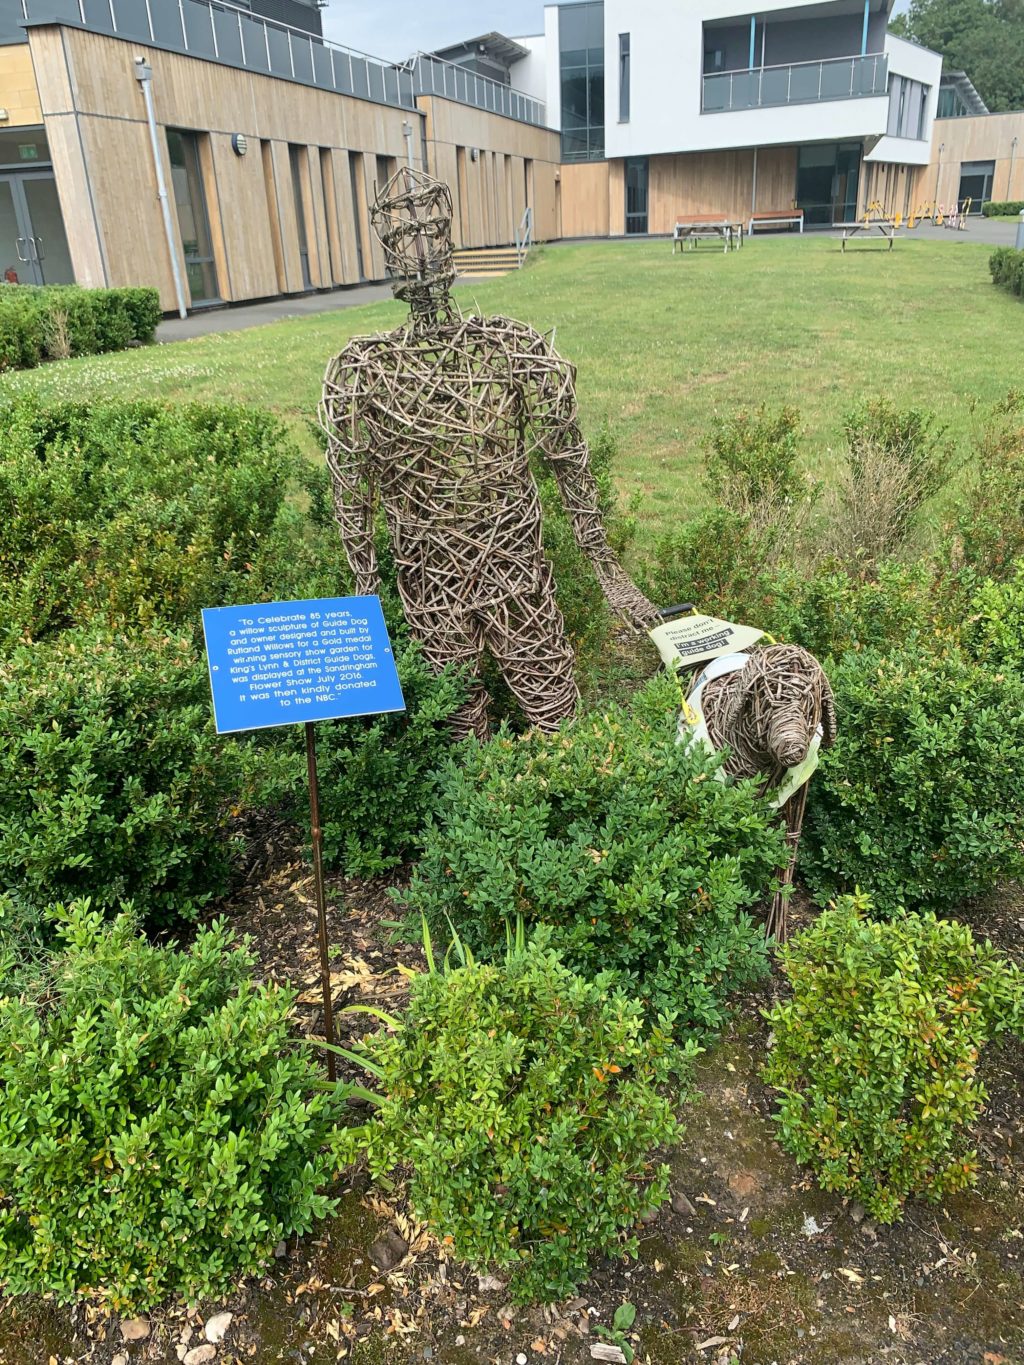 Willow sculpture of a guide dog and their owner at The Guide Dogs UK National Breeding Centre in Warwickshire